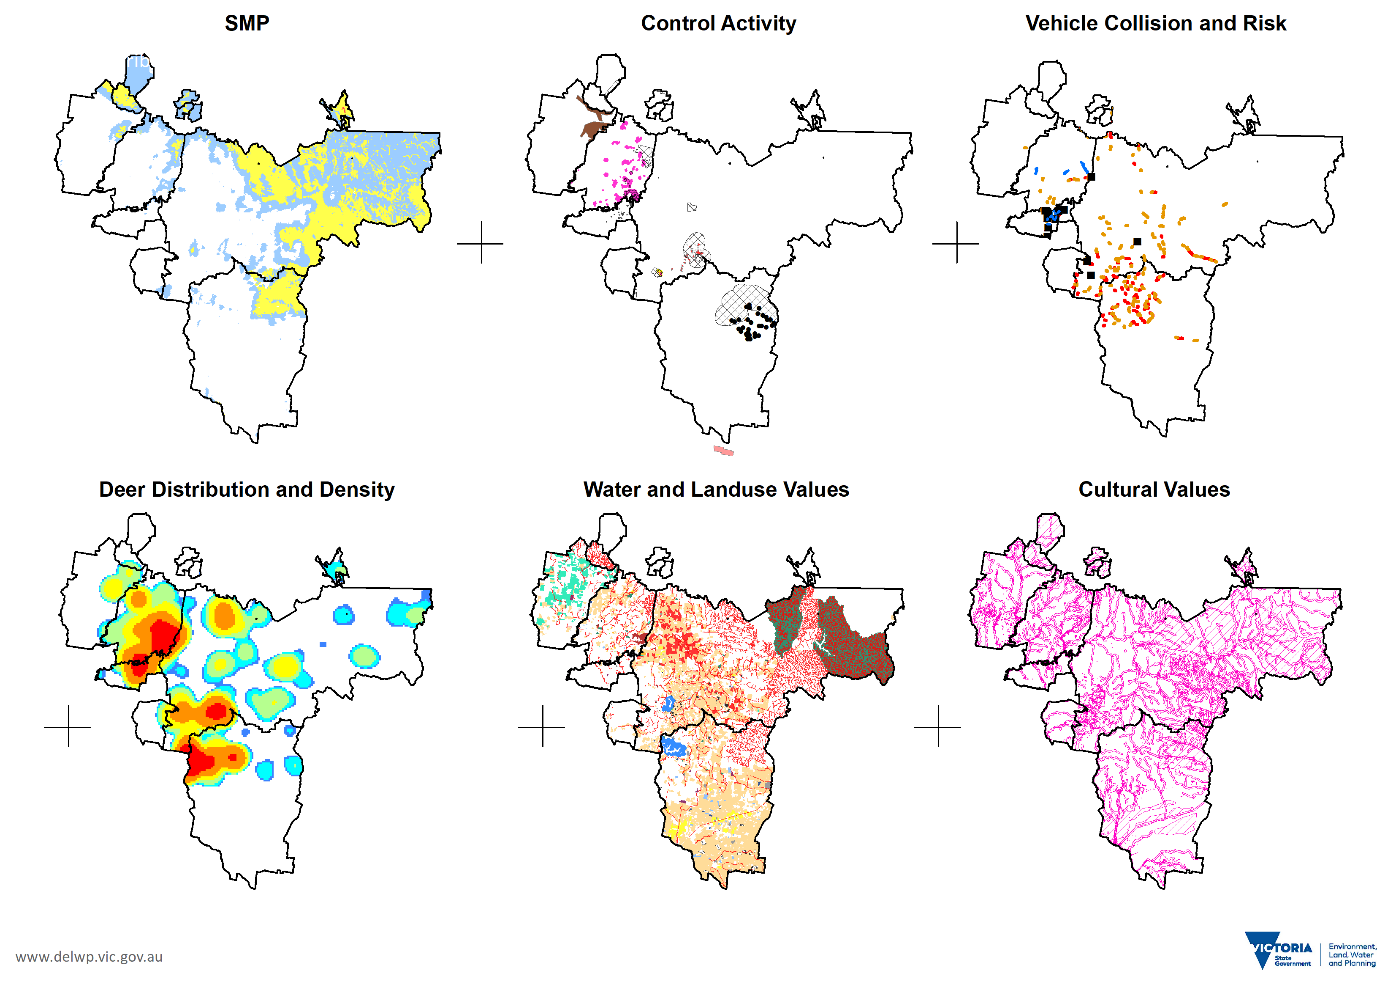 Six maps of the peri-urban area, including Strategic Management Prospects, Control Activity, Vehicle Collision and Risk, Deer Distribution and Density, Water and Landuse Values, and Cultural Values.